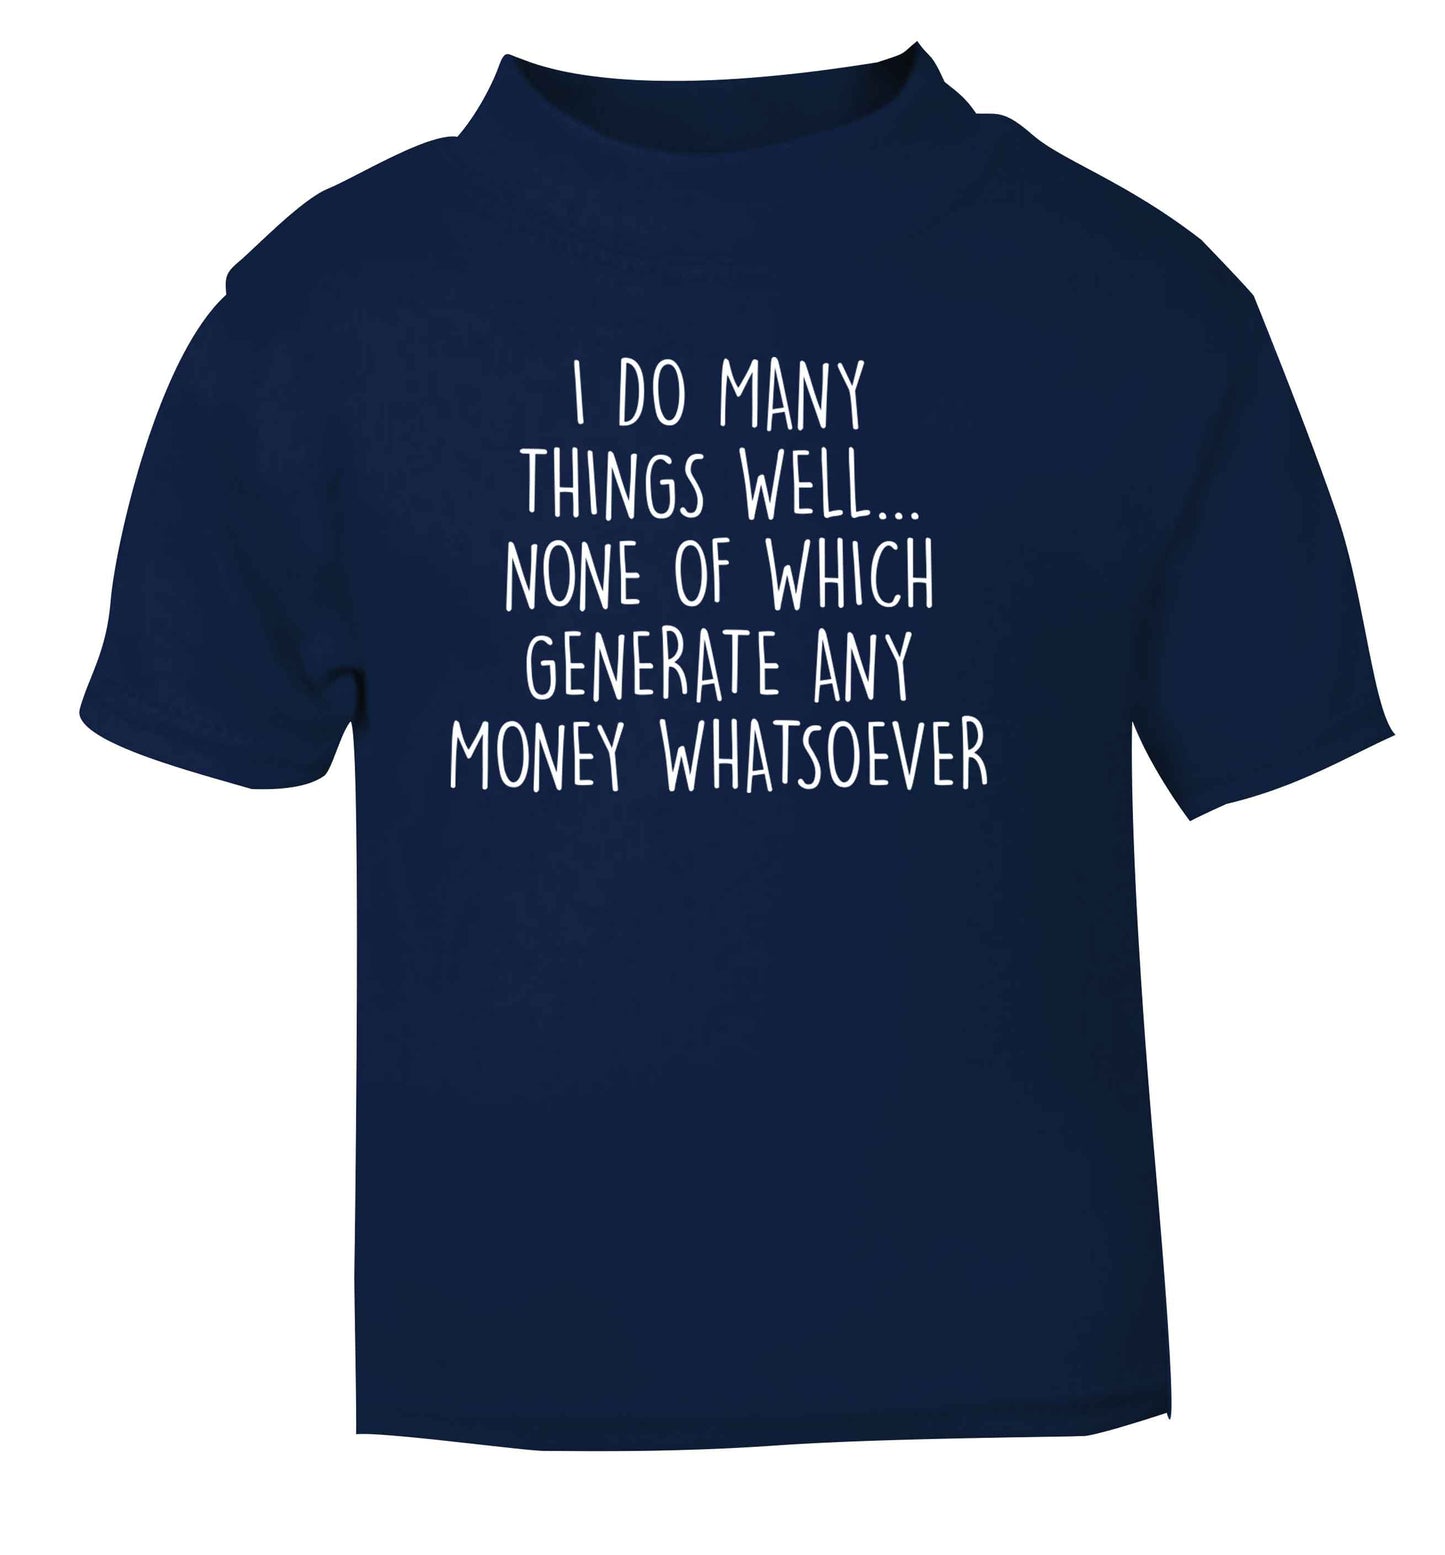 I do many things well none of which generate income navy Baby Toddler Tshirt 2 Years